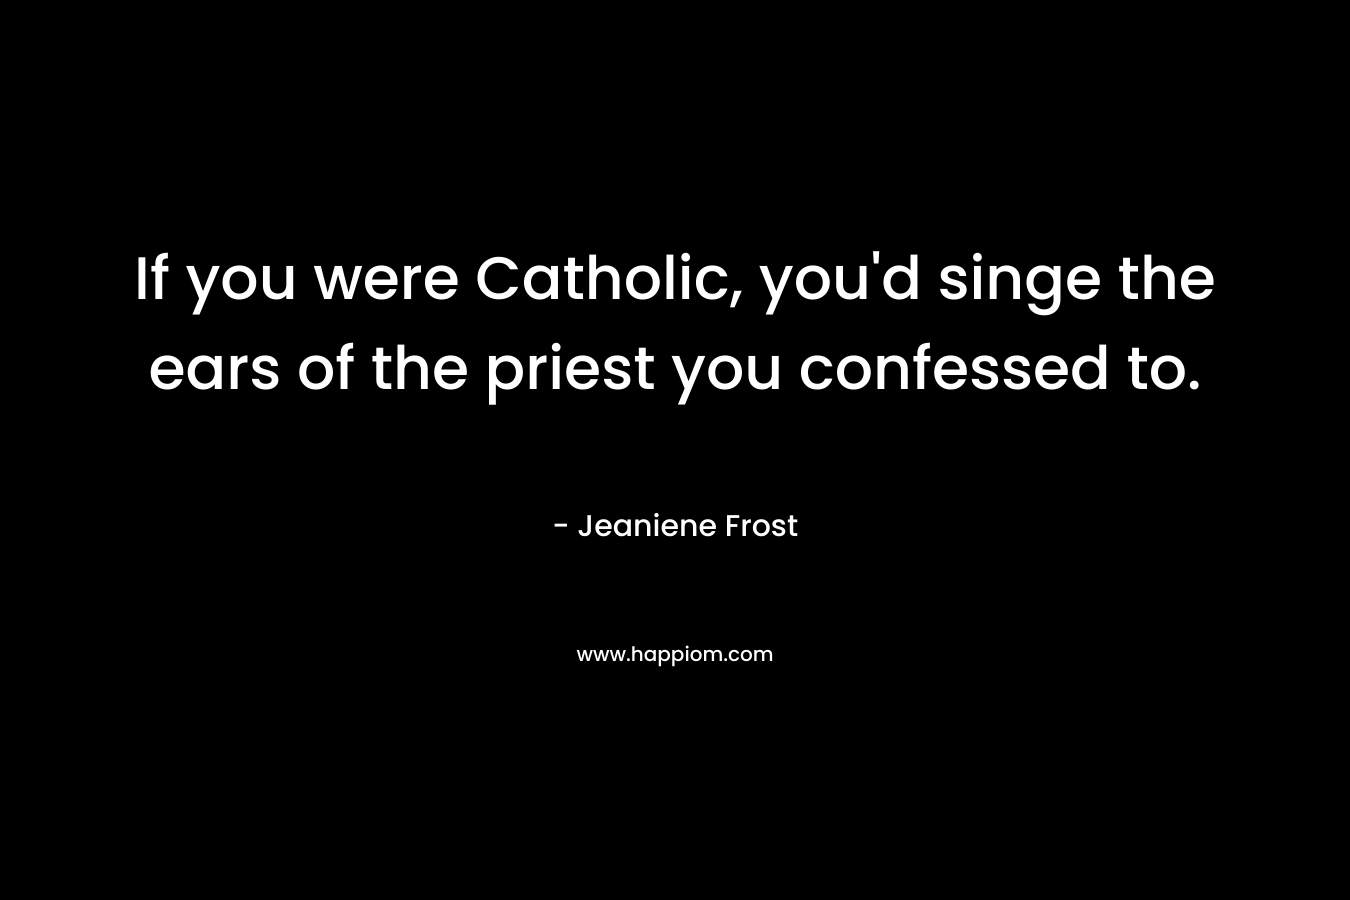 If you were Catholic, you’d singe the ears of the priest you confessed to. – Jeaniene Frost